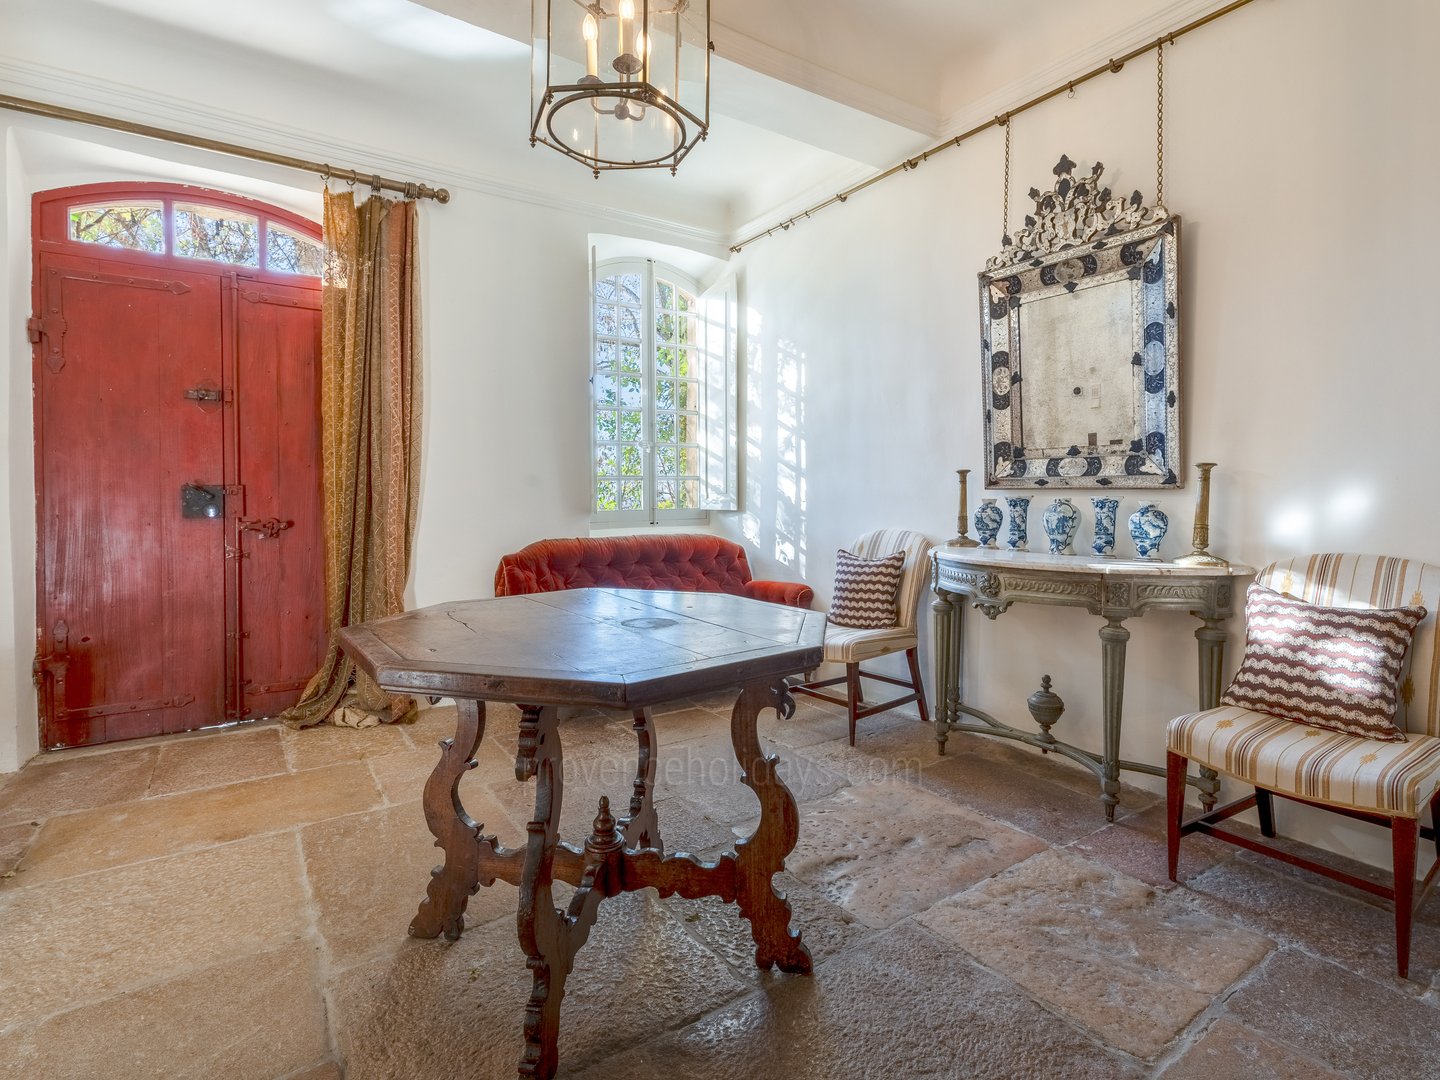 18th century Bastide with views of Luberon for sale - Bonnieux - 32